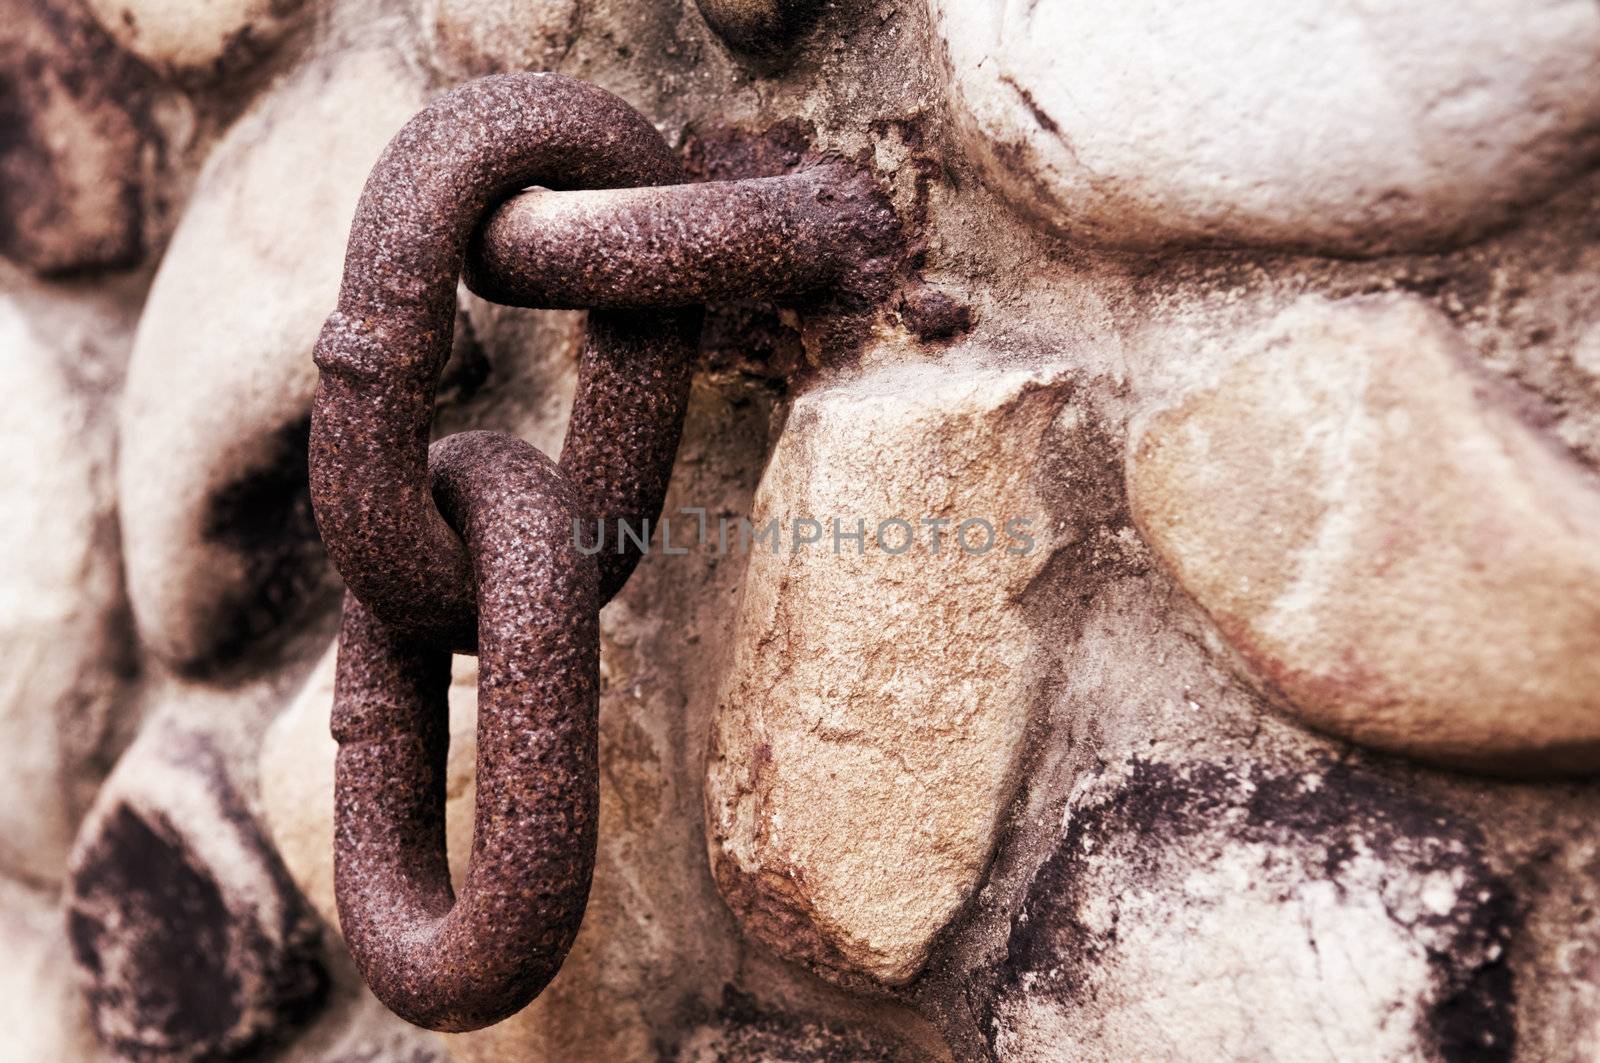 Rusty chain hanging on old stone wall
